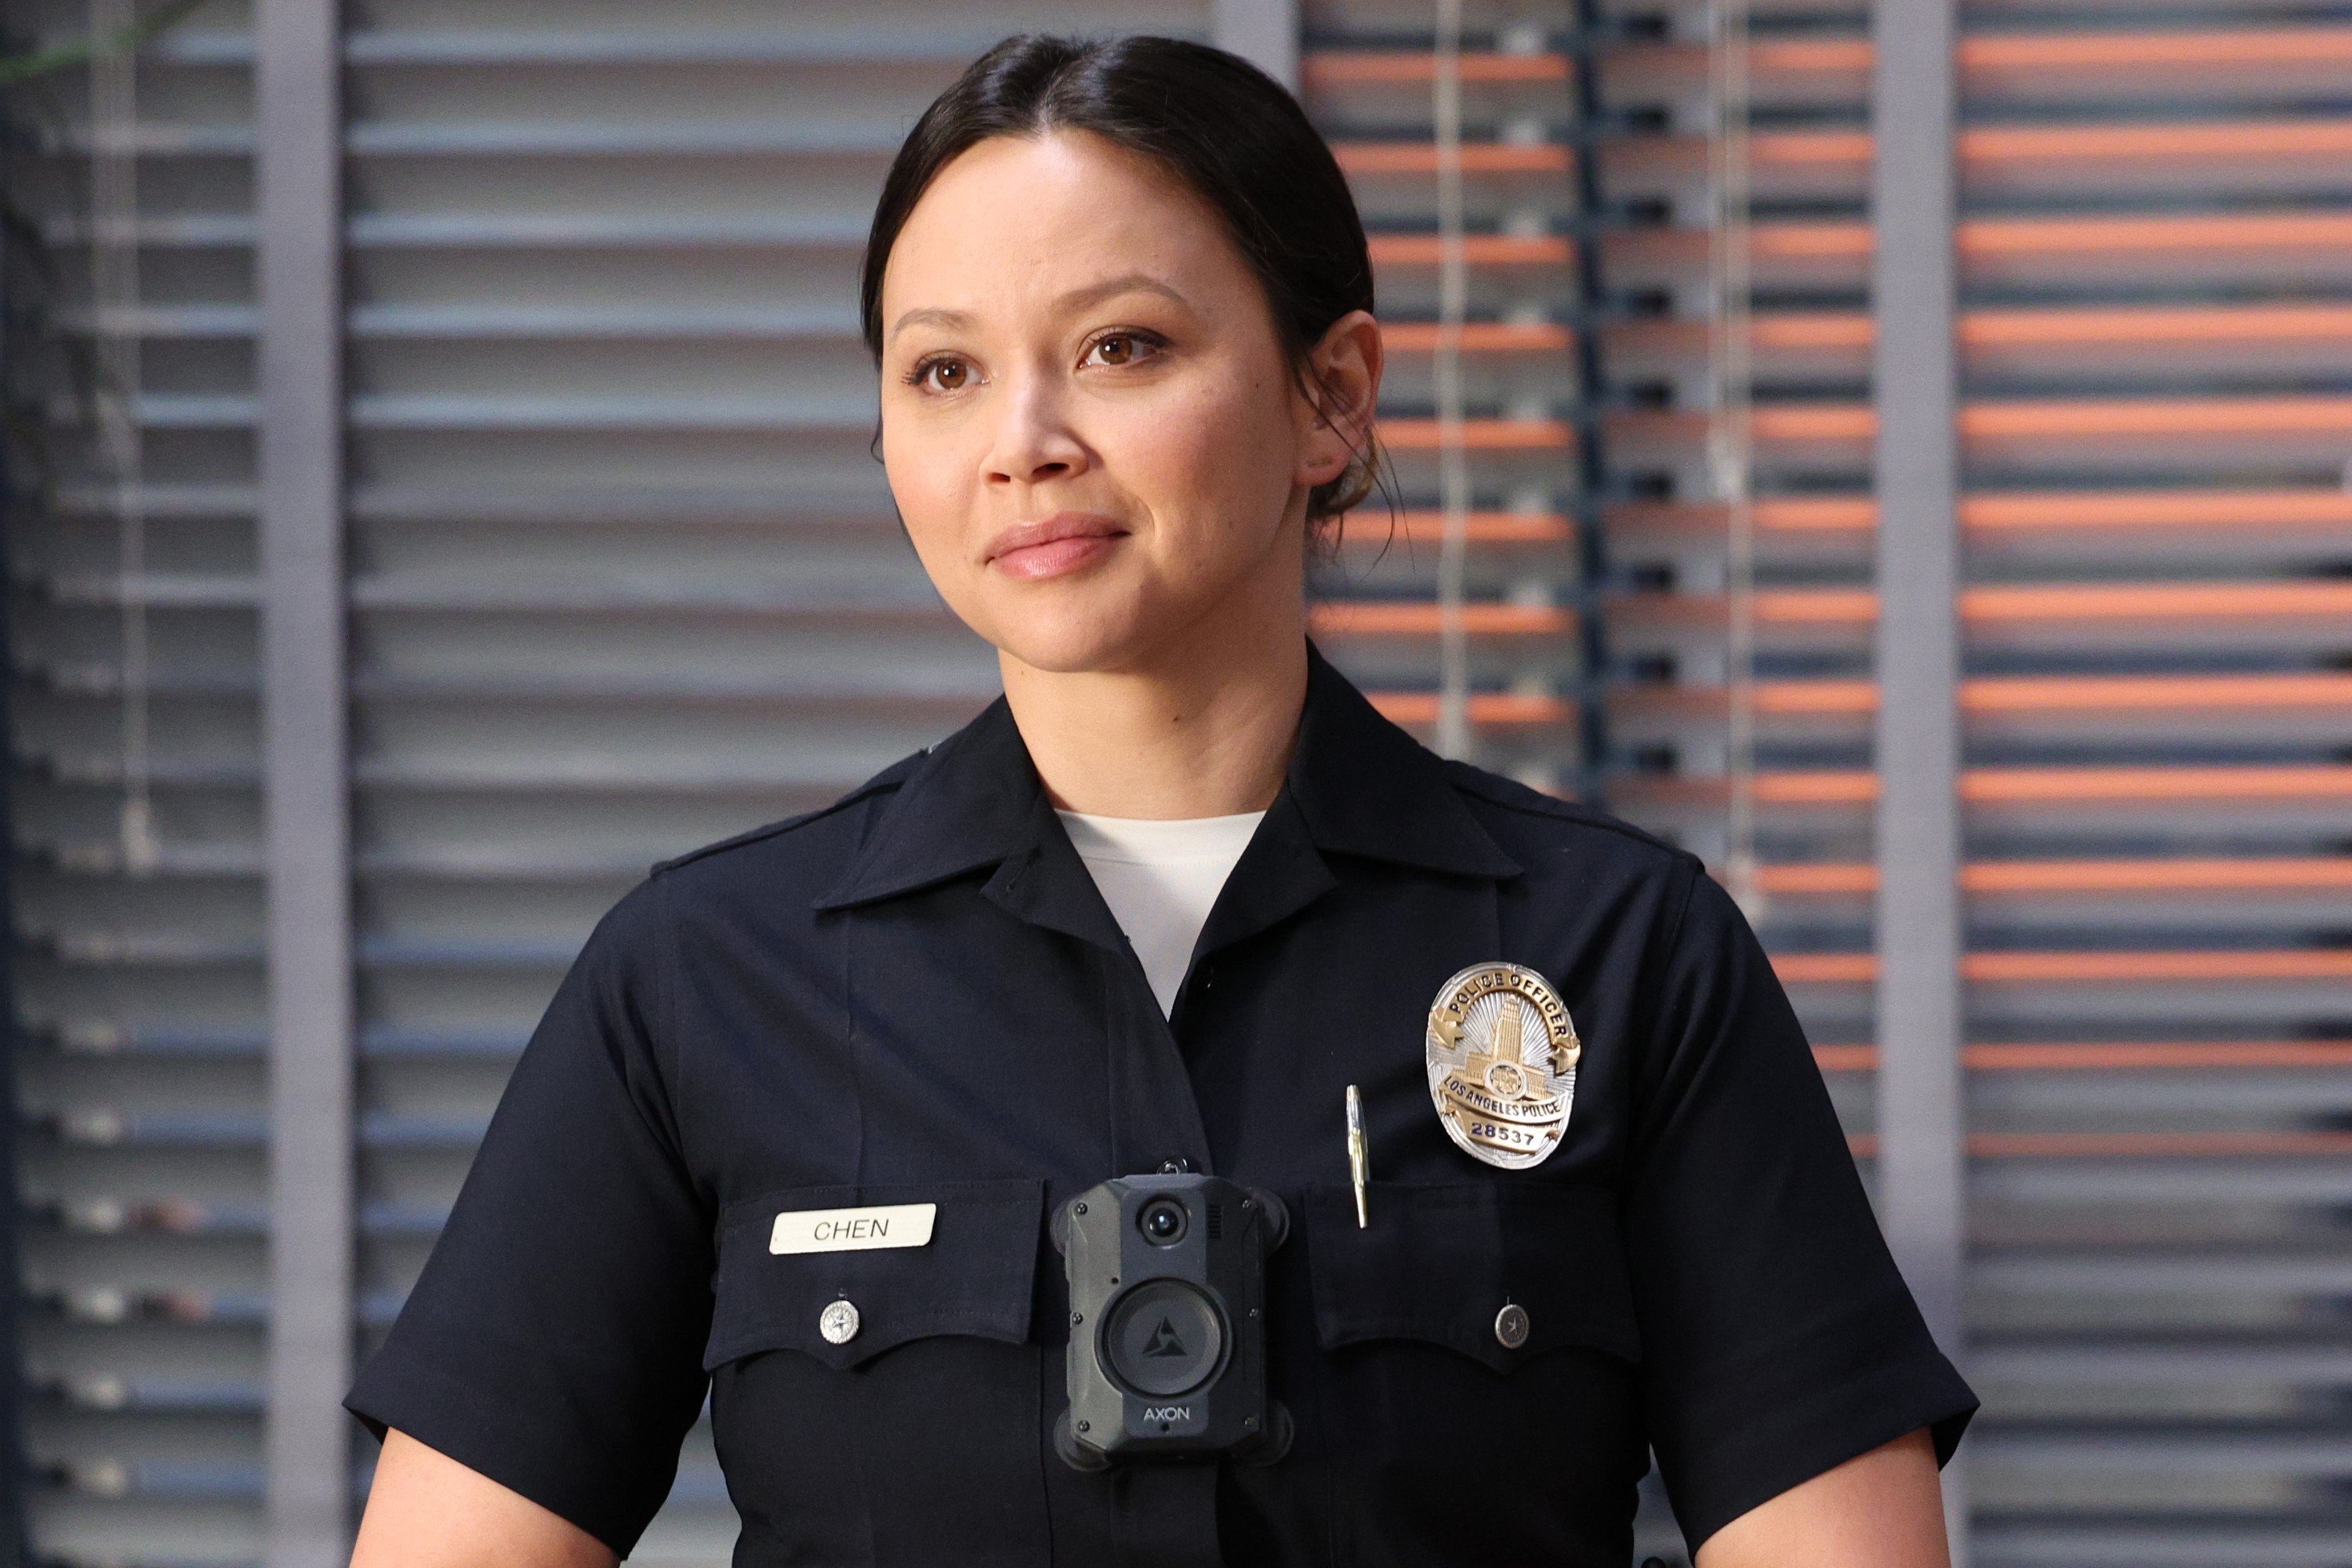 Melissa O'Neil stars as Lucy Chen in 'The Rookie' Season 5, which isn't on tonight, Nov. 13. Lucy wears her cop uniform in the photo.